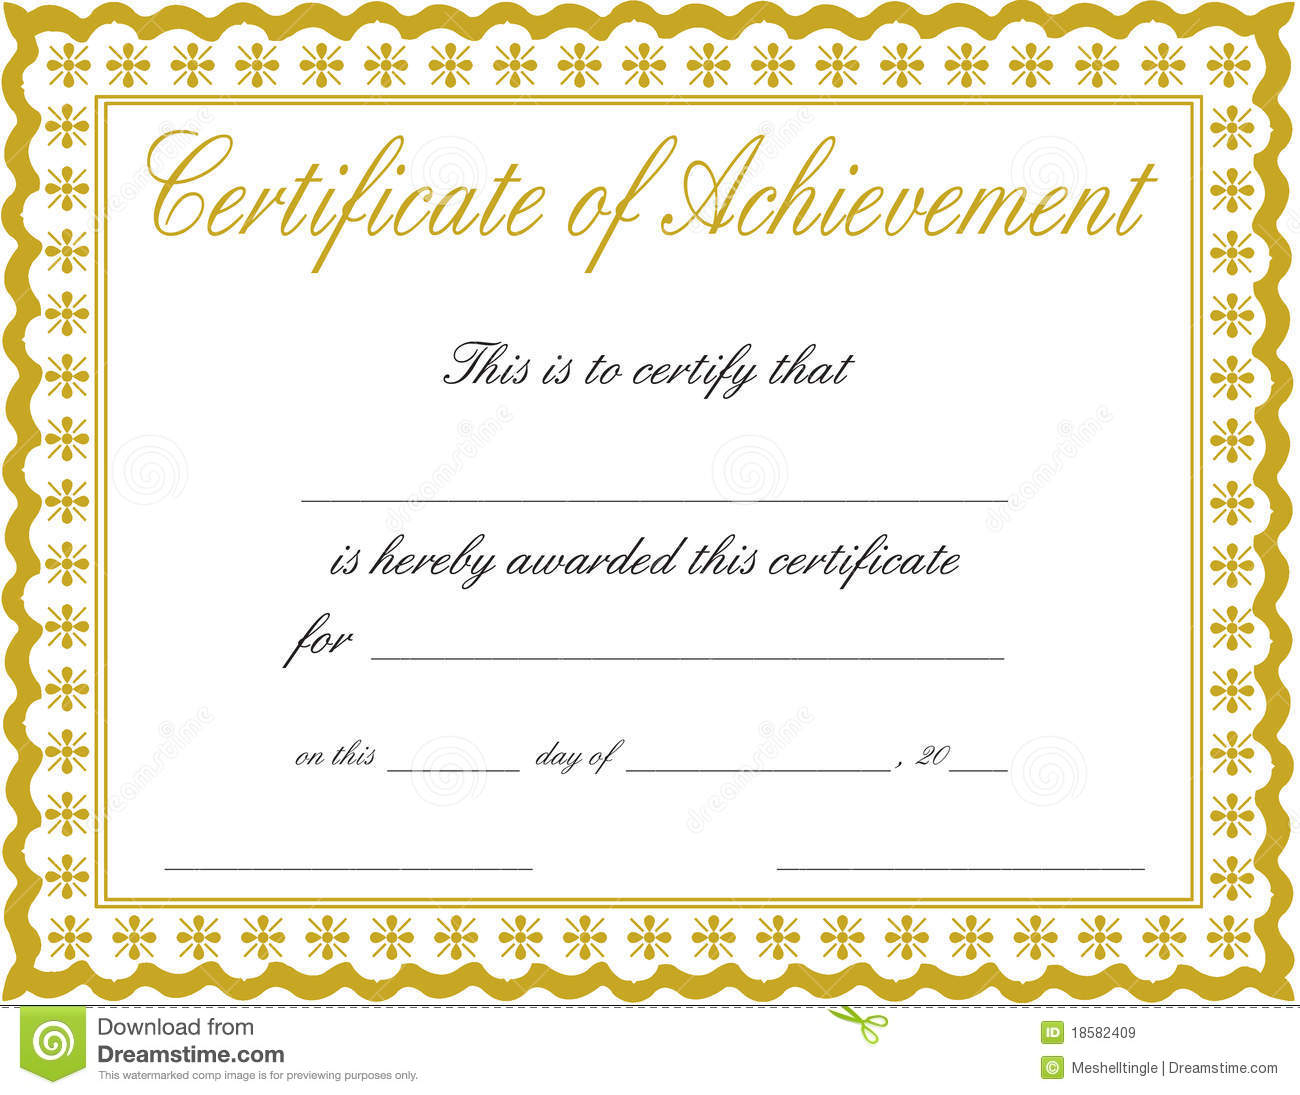 Free Printable Certificate Of Achievement Template | Mult With Free Printable Certificate Of Achievement Template